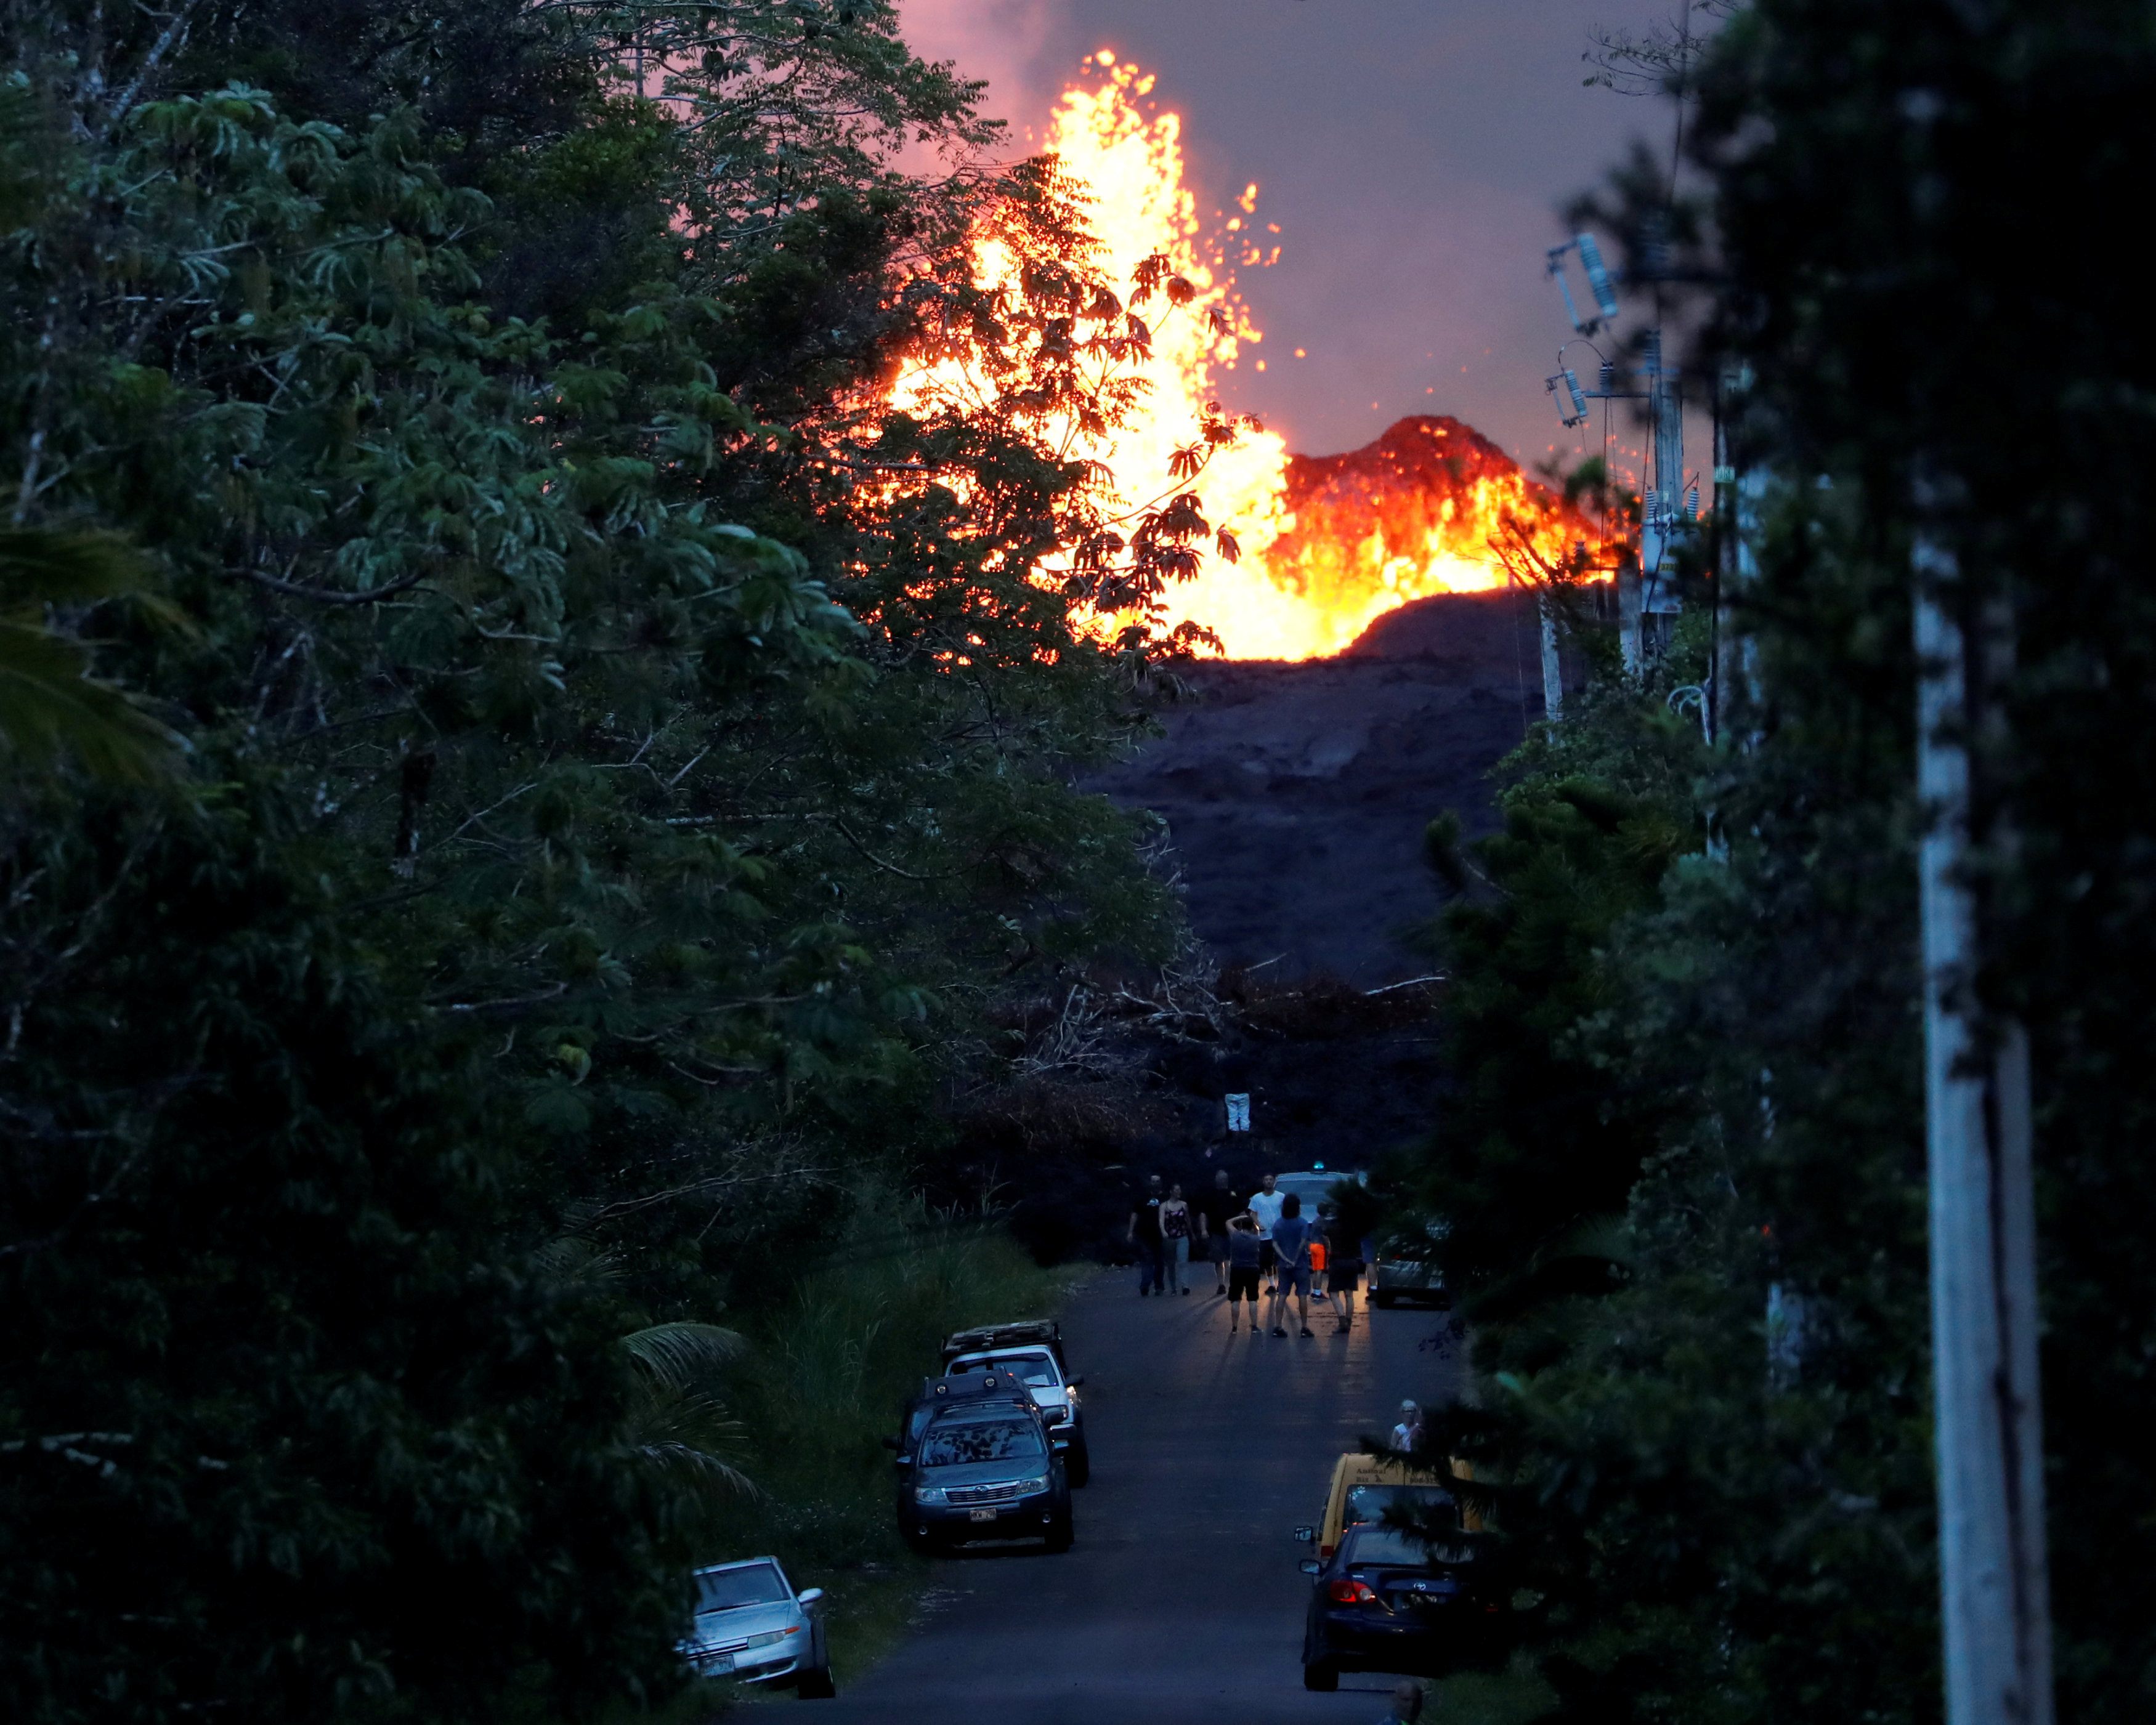 Lava covers potentially explosive well at Hawaii geothermal plant